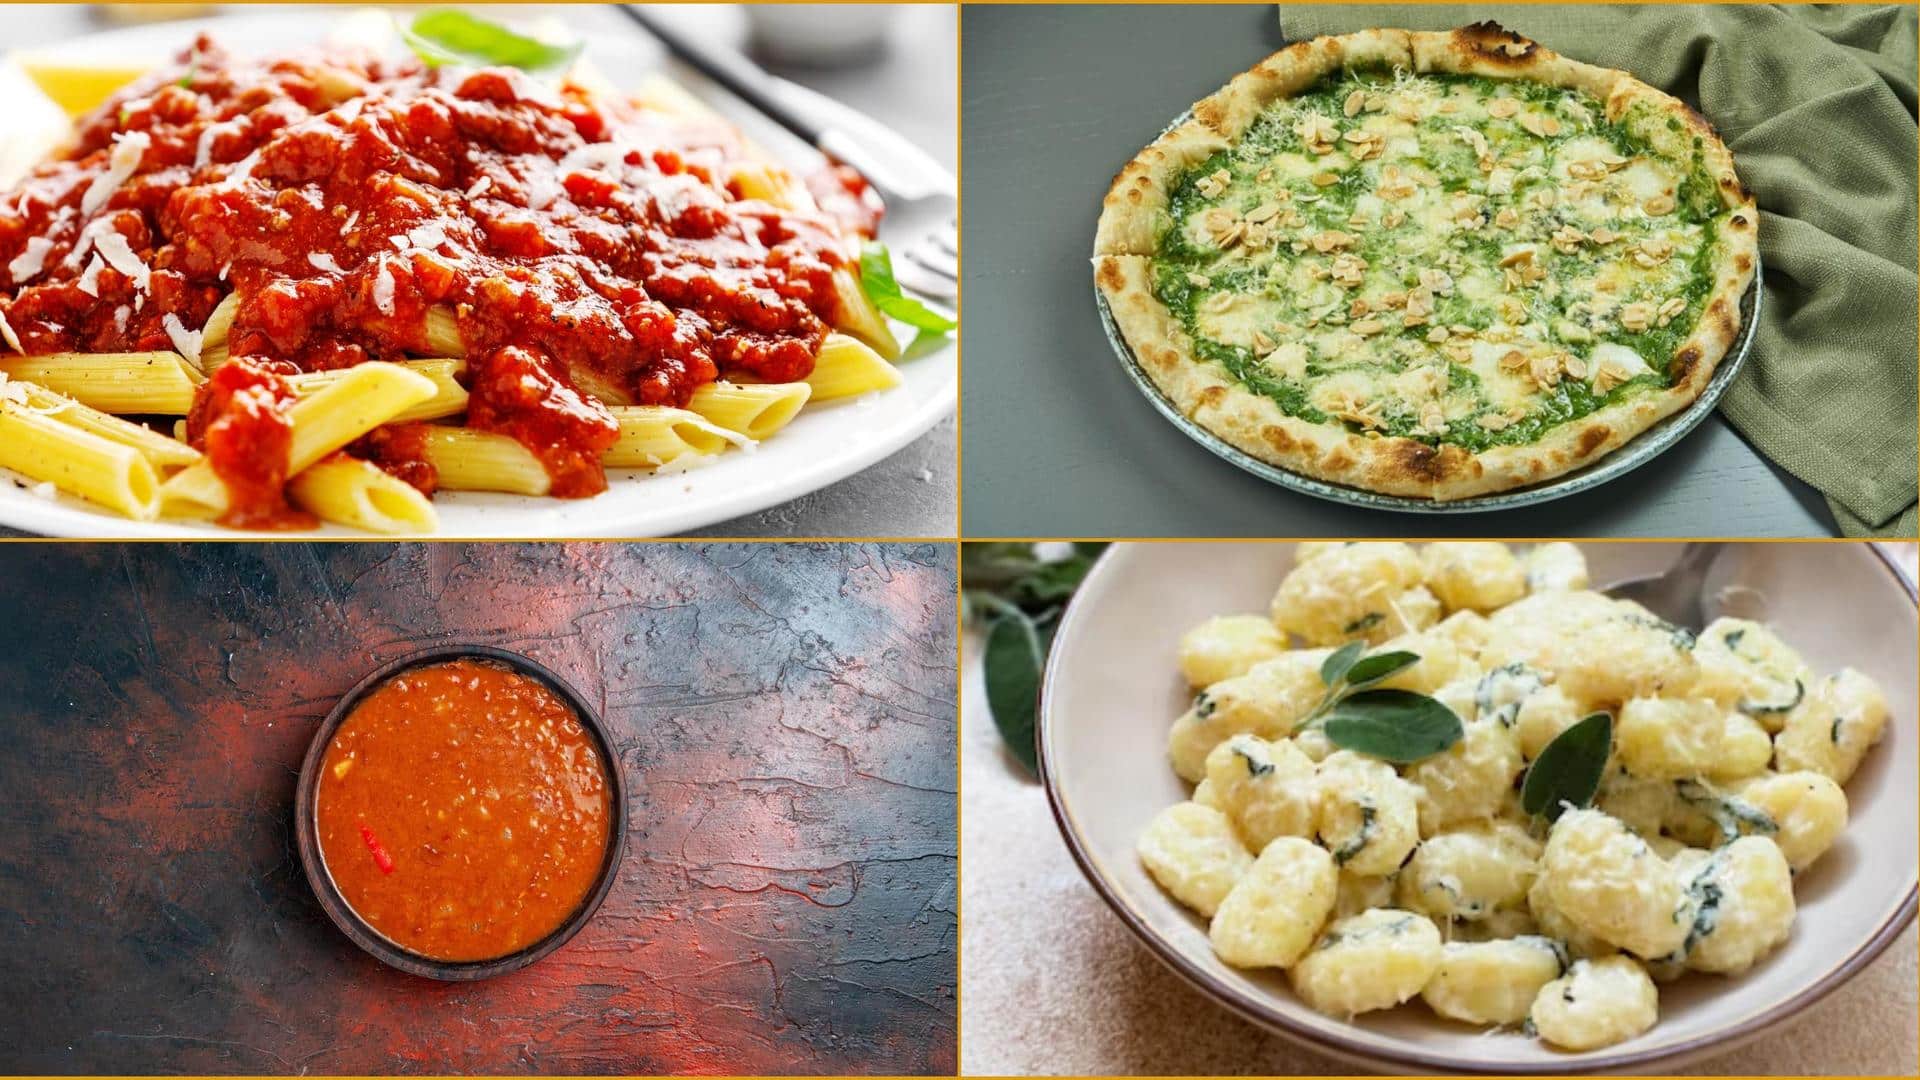 Sick of high prices? Here are some delicious tomato-less recipes 